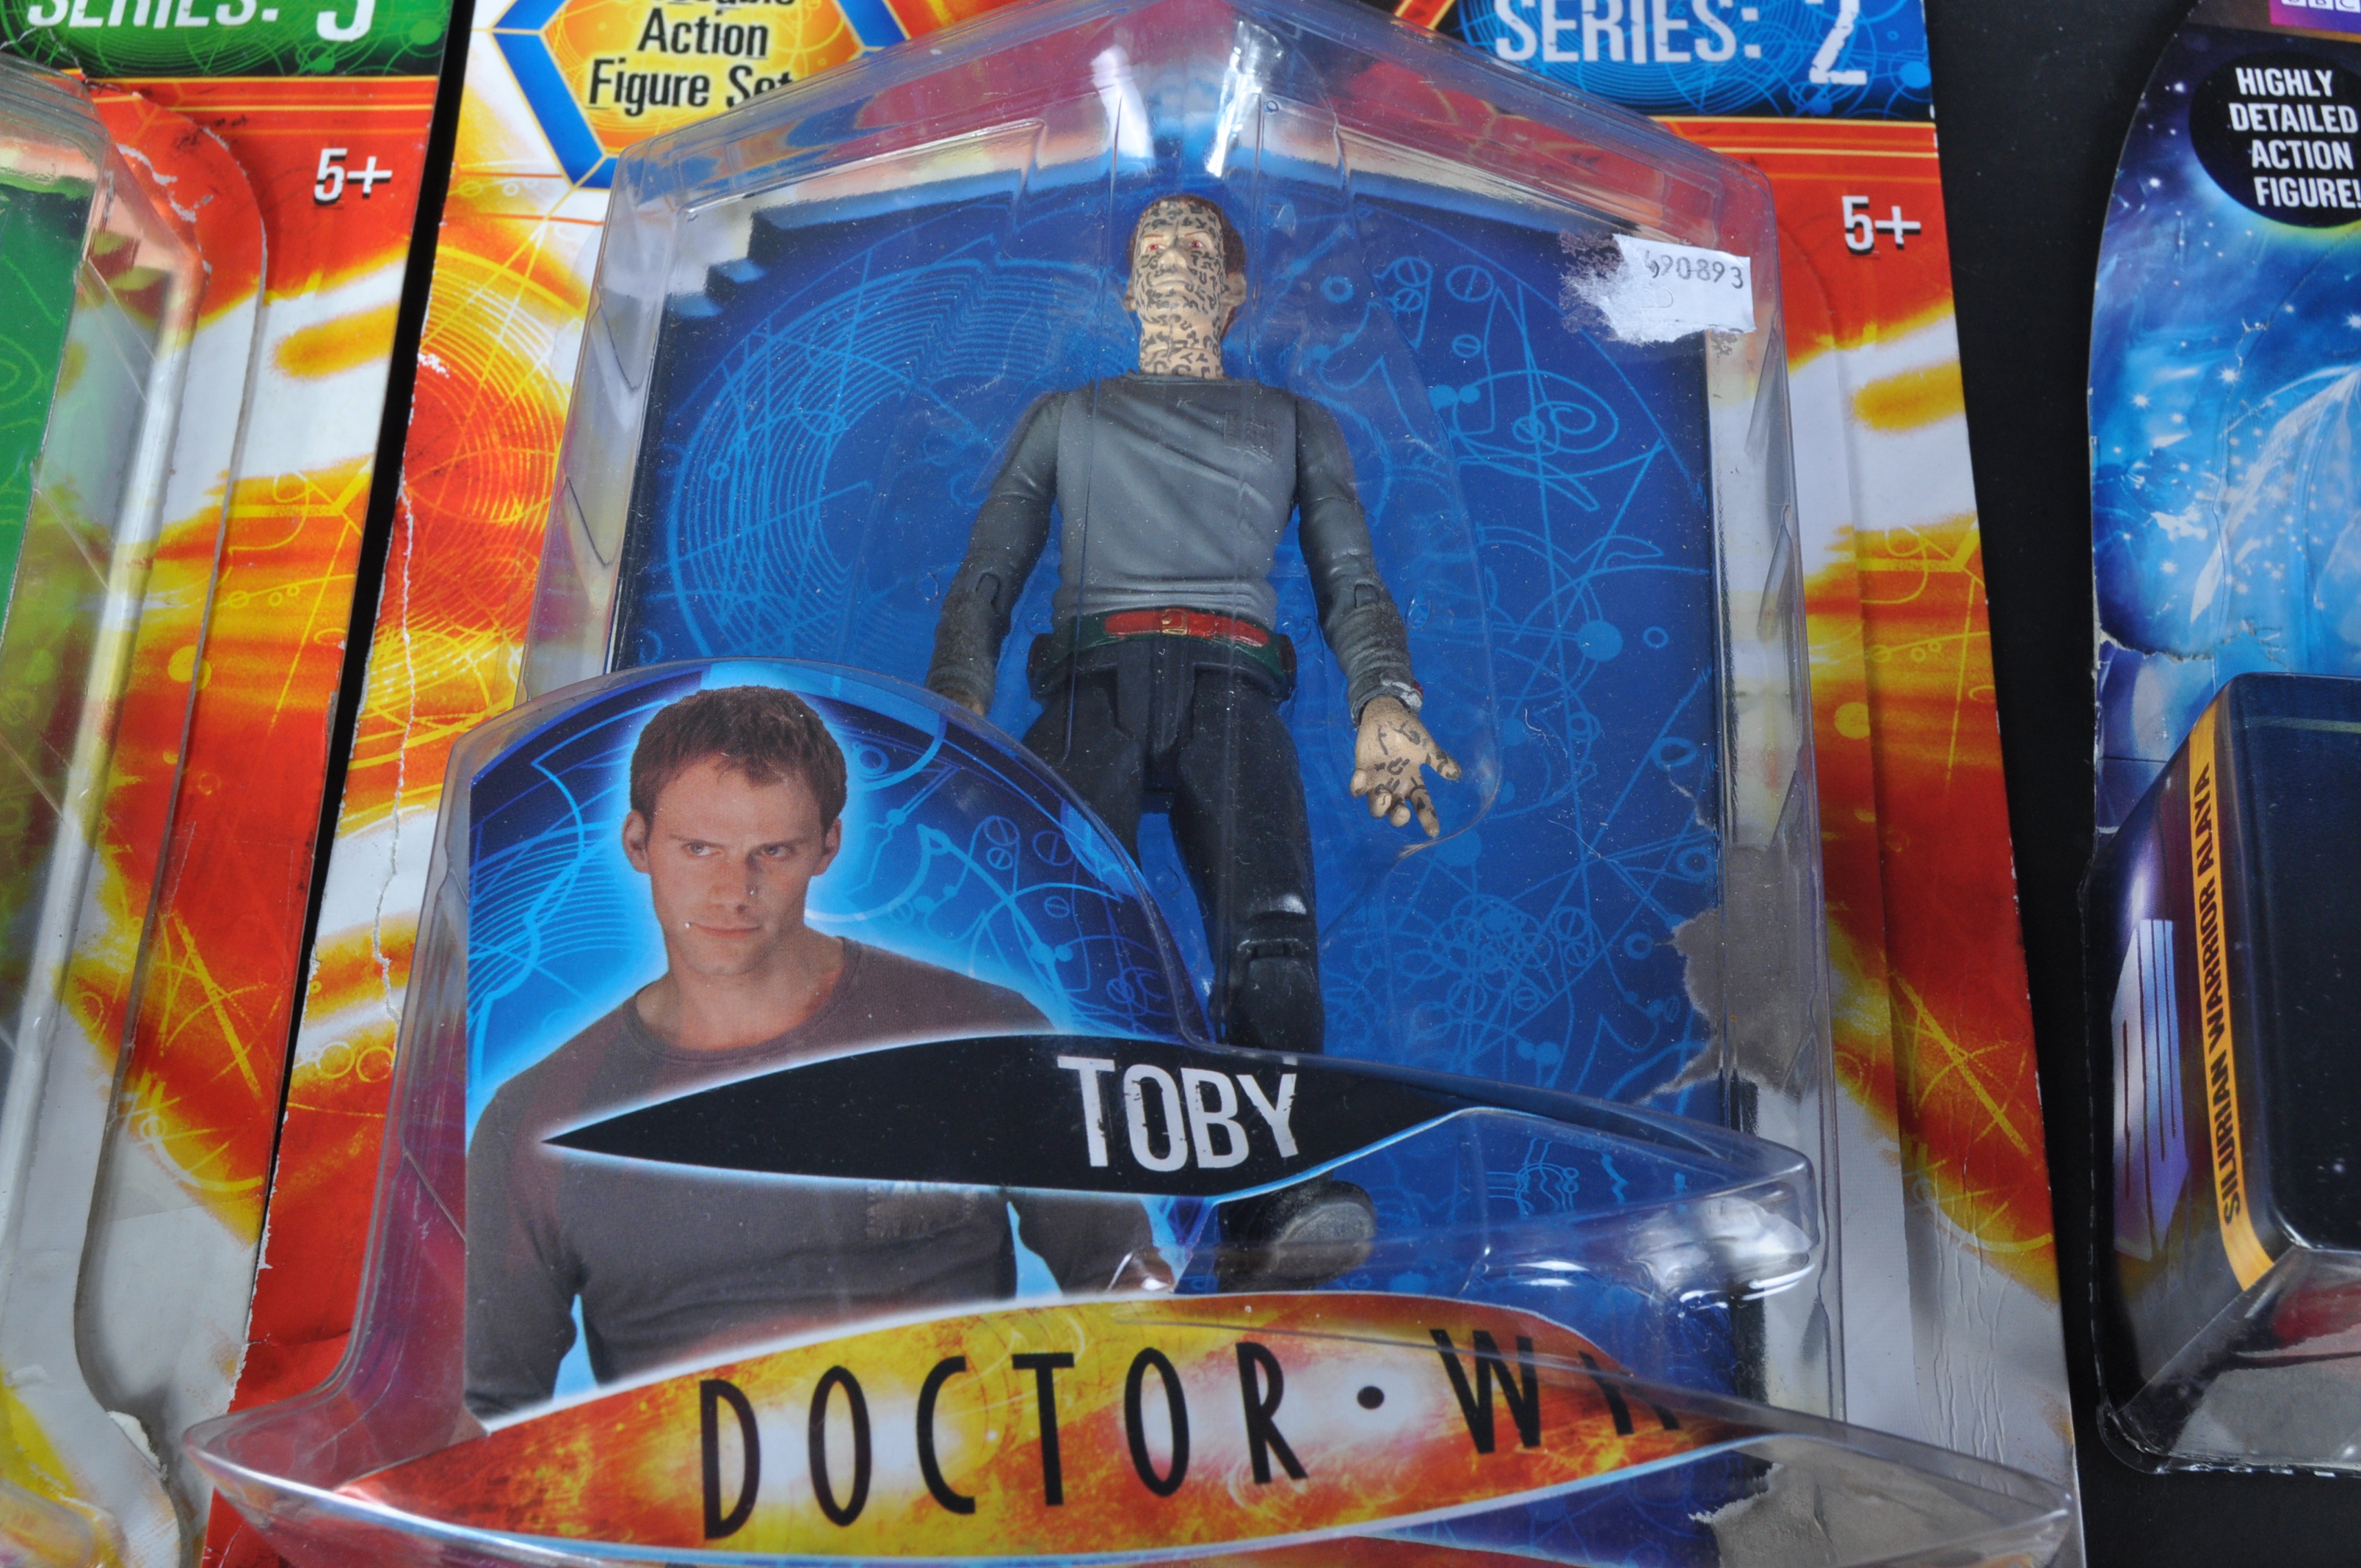 DOCTOR WHO - CHARACTER OPTIONS - CARDED ACTION FIGURES - Image 5 of 7